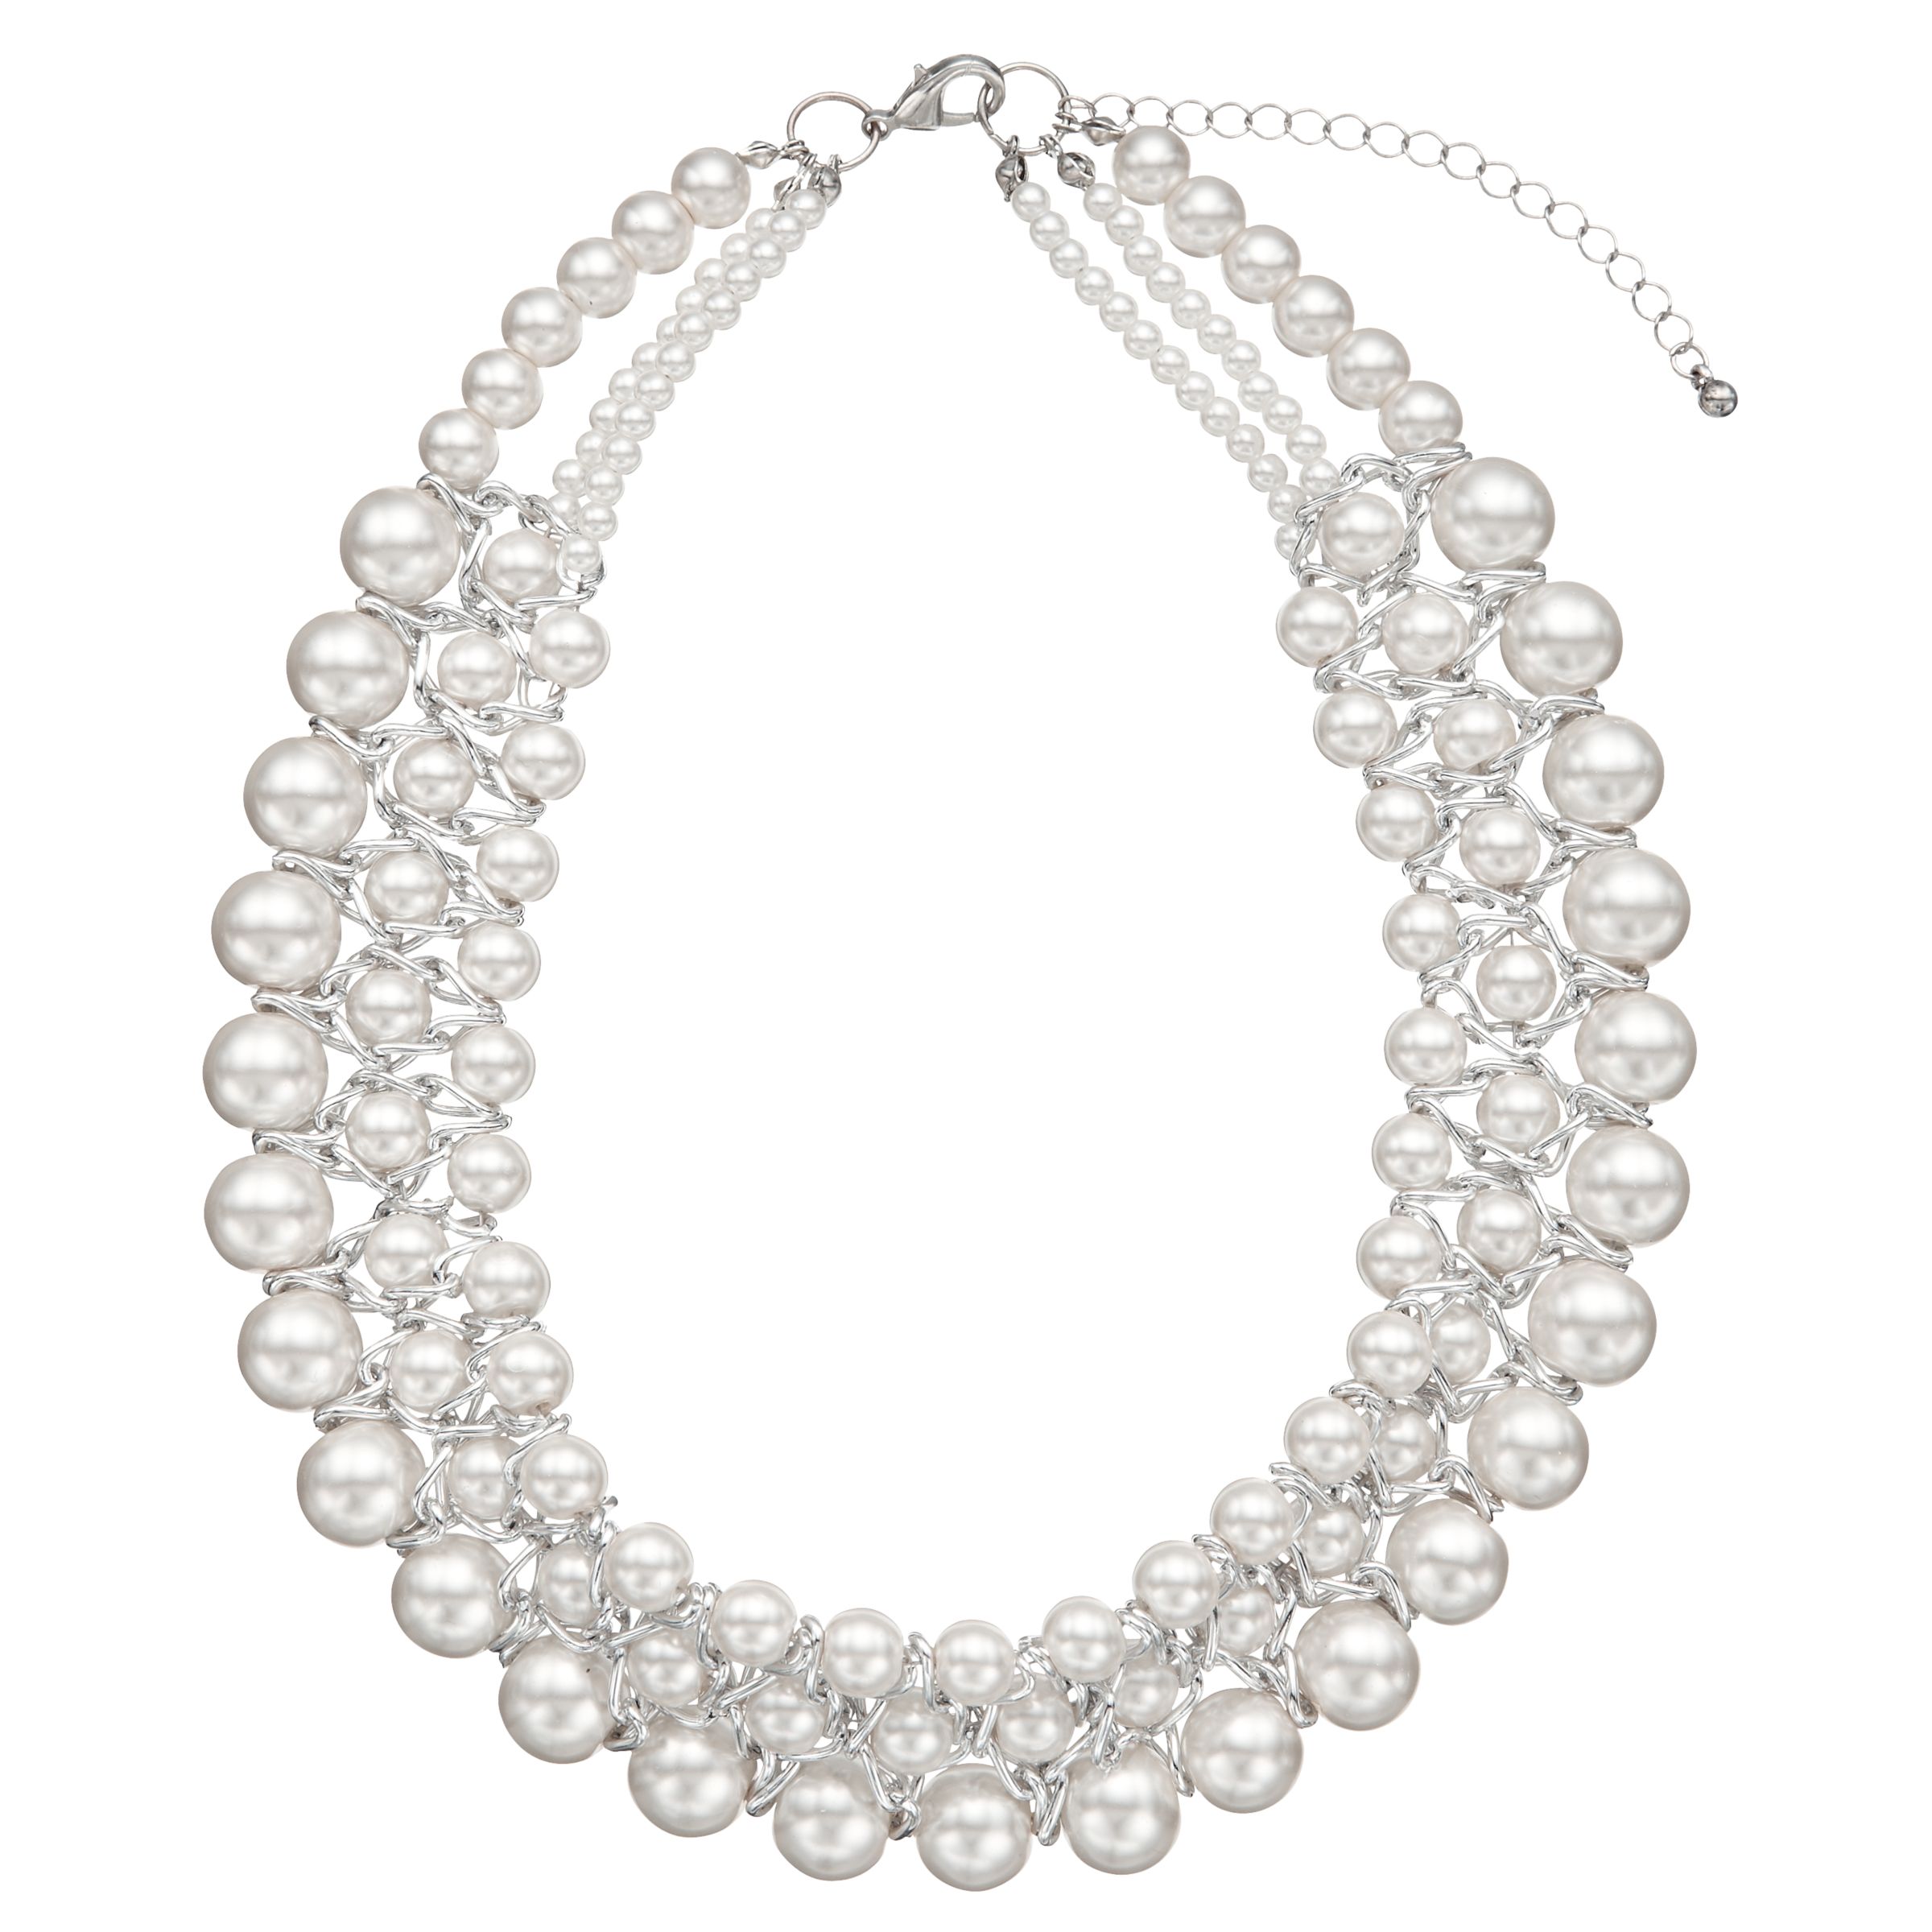  John  Lewis  Graduating Faux Pearl  Collar Necklace White at 